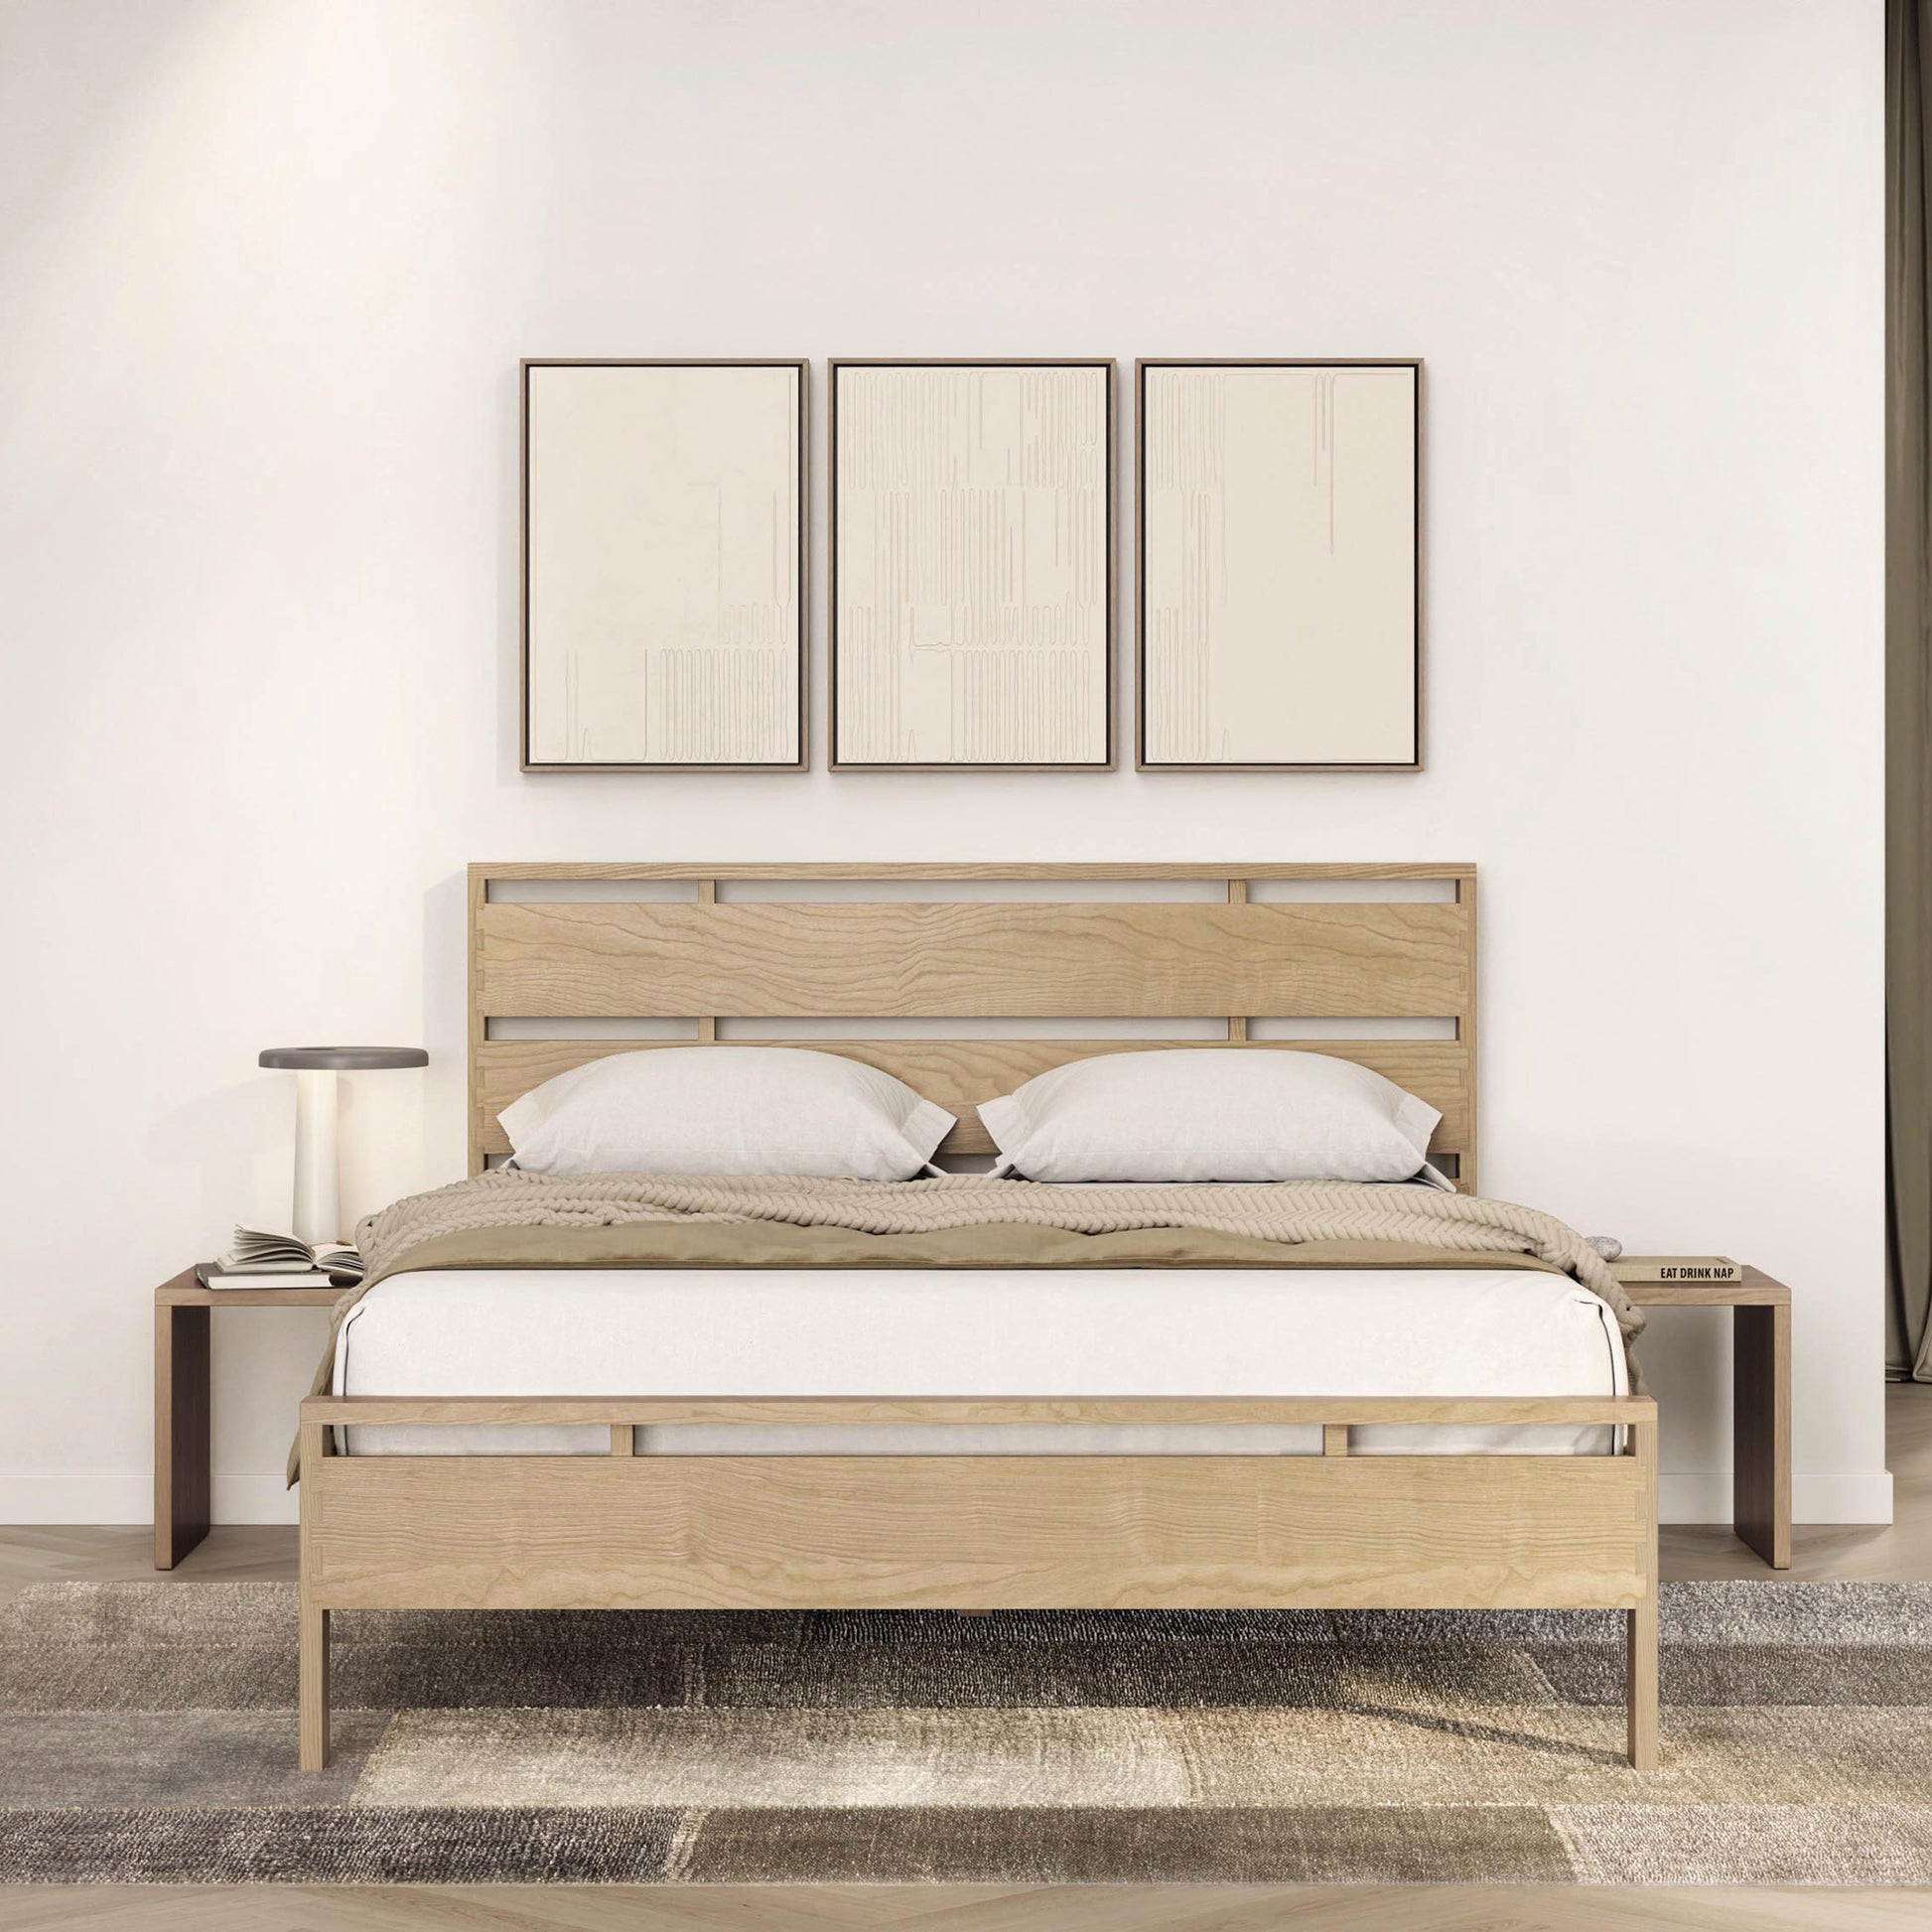 A neat and modern bedroom with a double Oslo Platform Bed by Copeland Furniture, two pillows, and a three-piece wall art above the headboard.